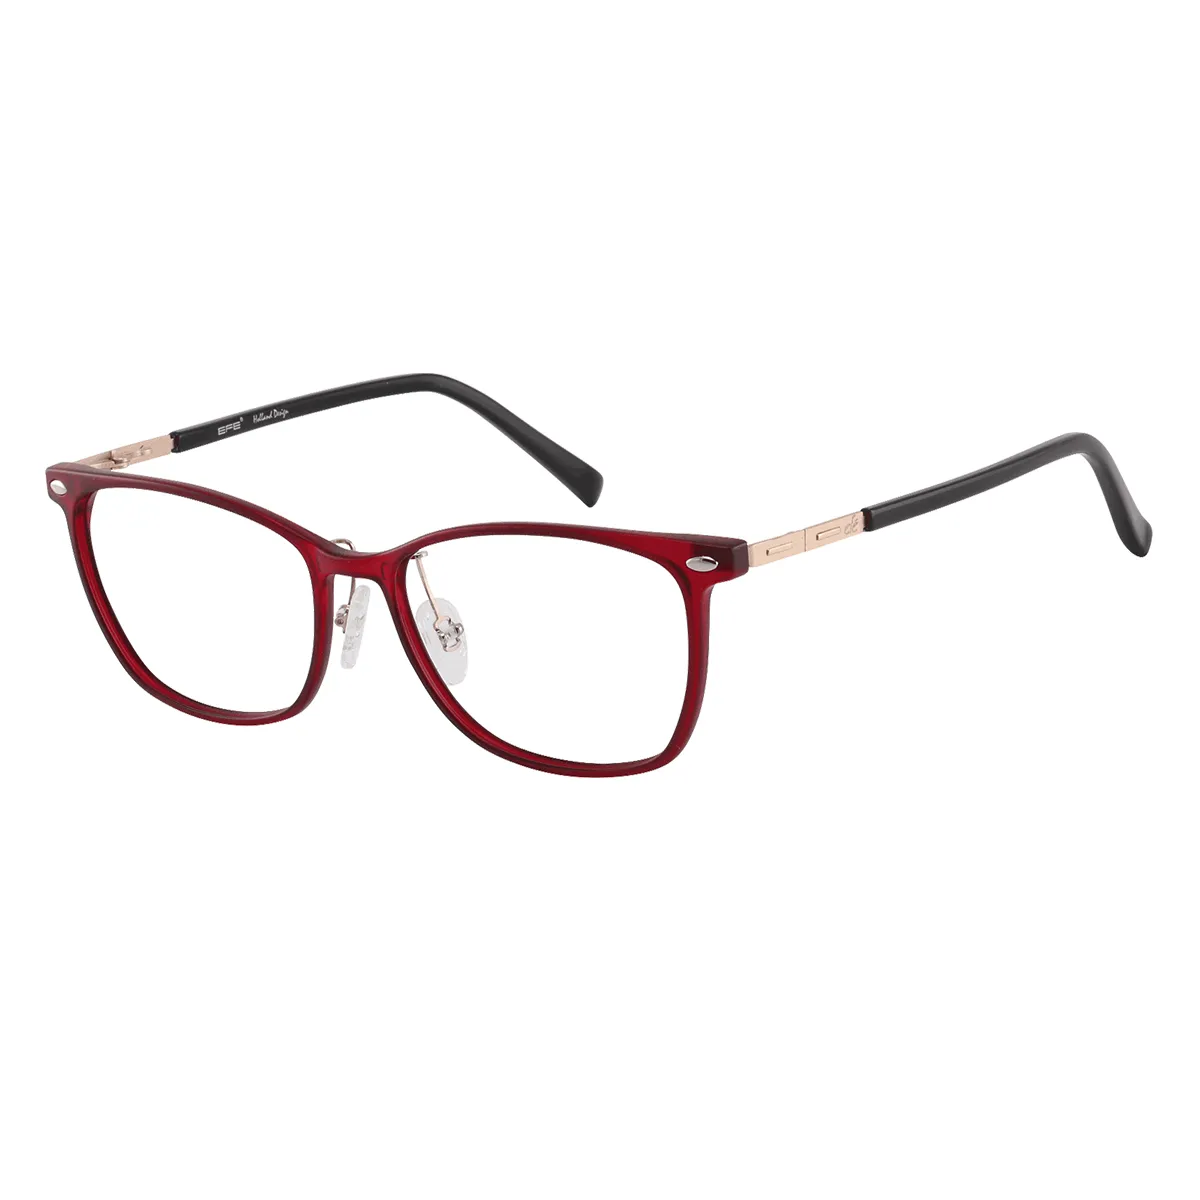 Fashion Square Red Glasses for Women